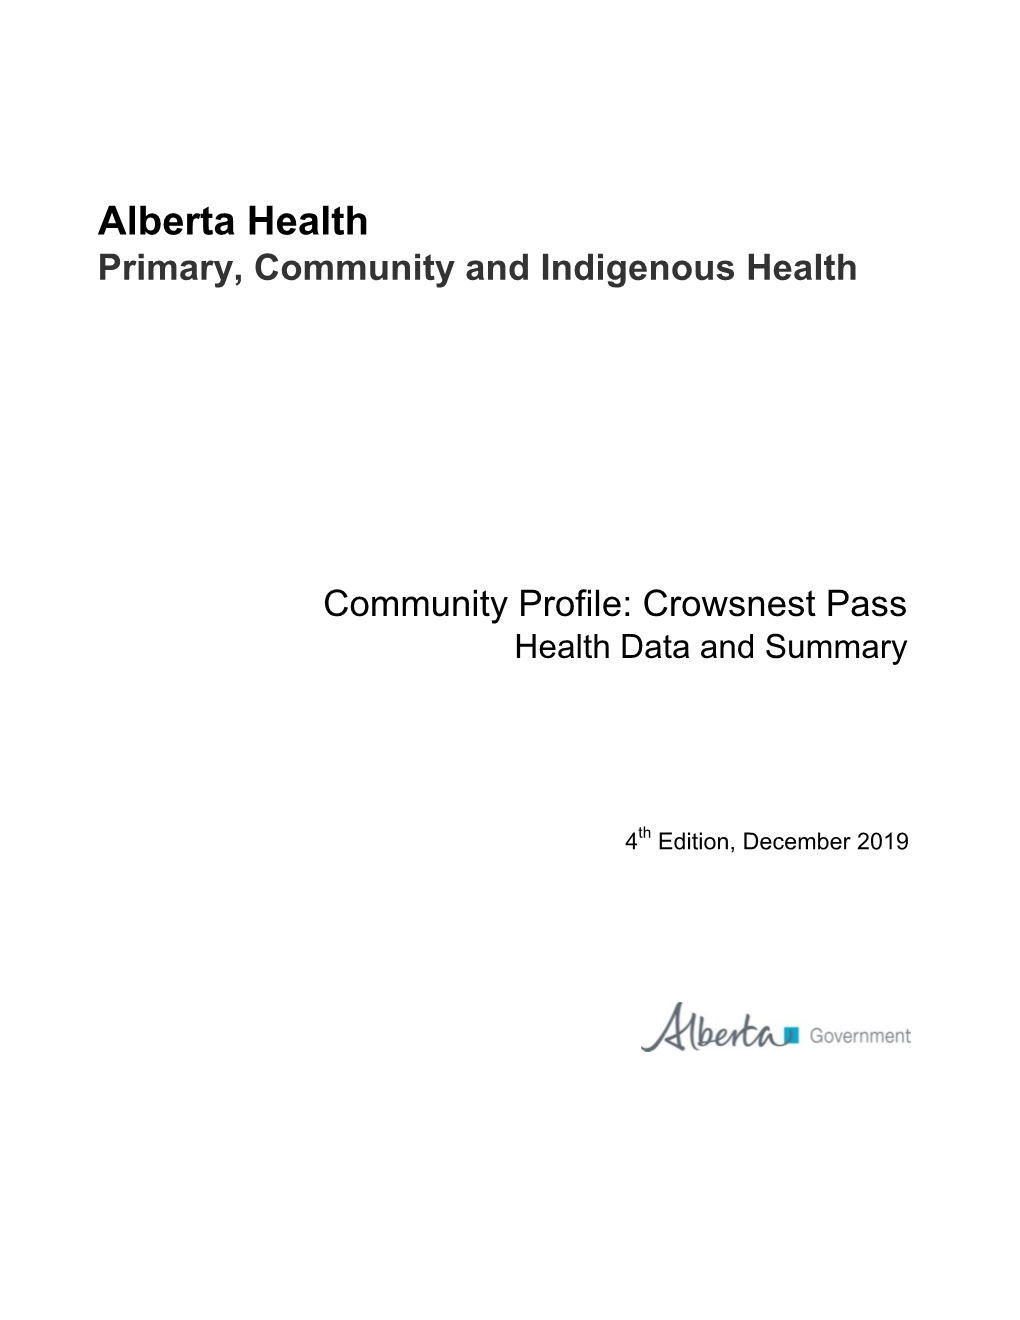 Crowsnest Pass, Health Data and Summary, 4Th Edition